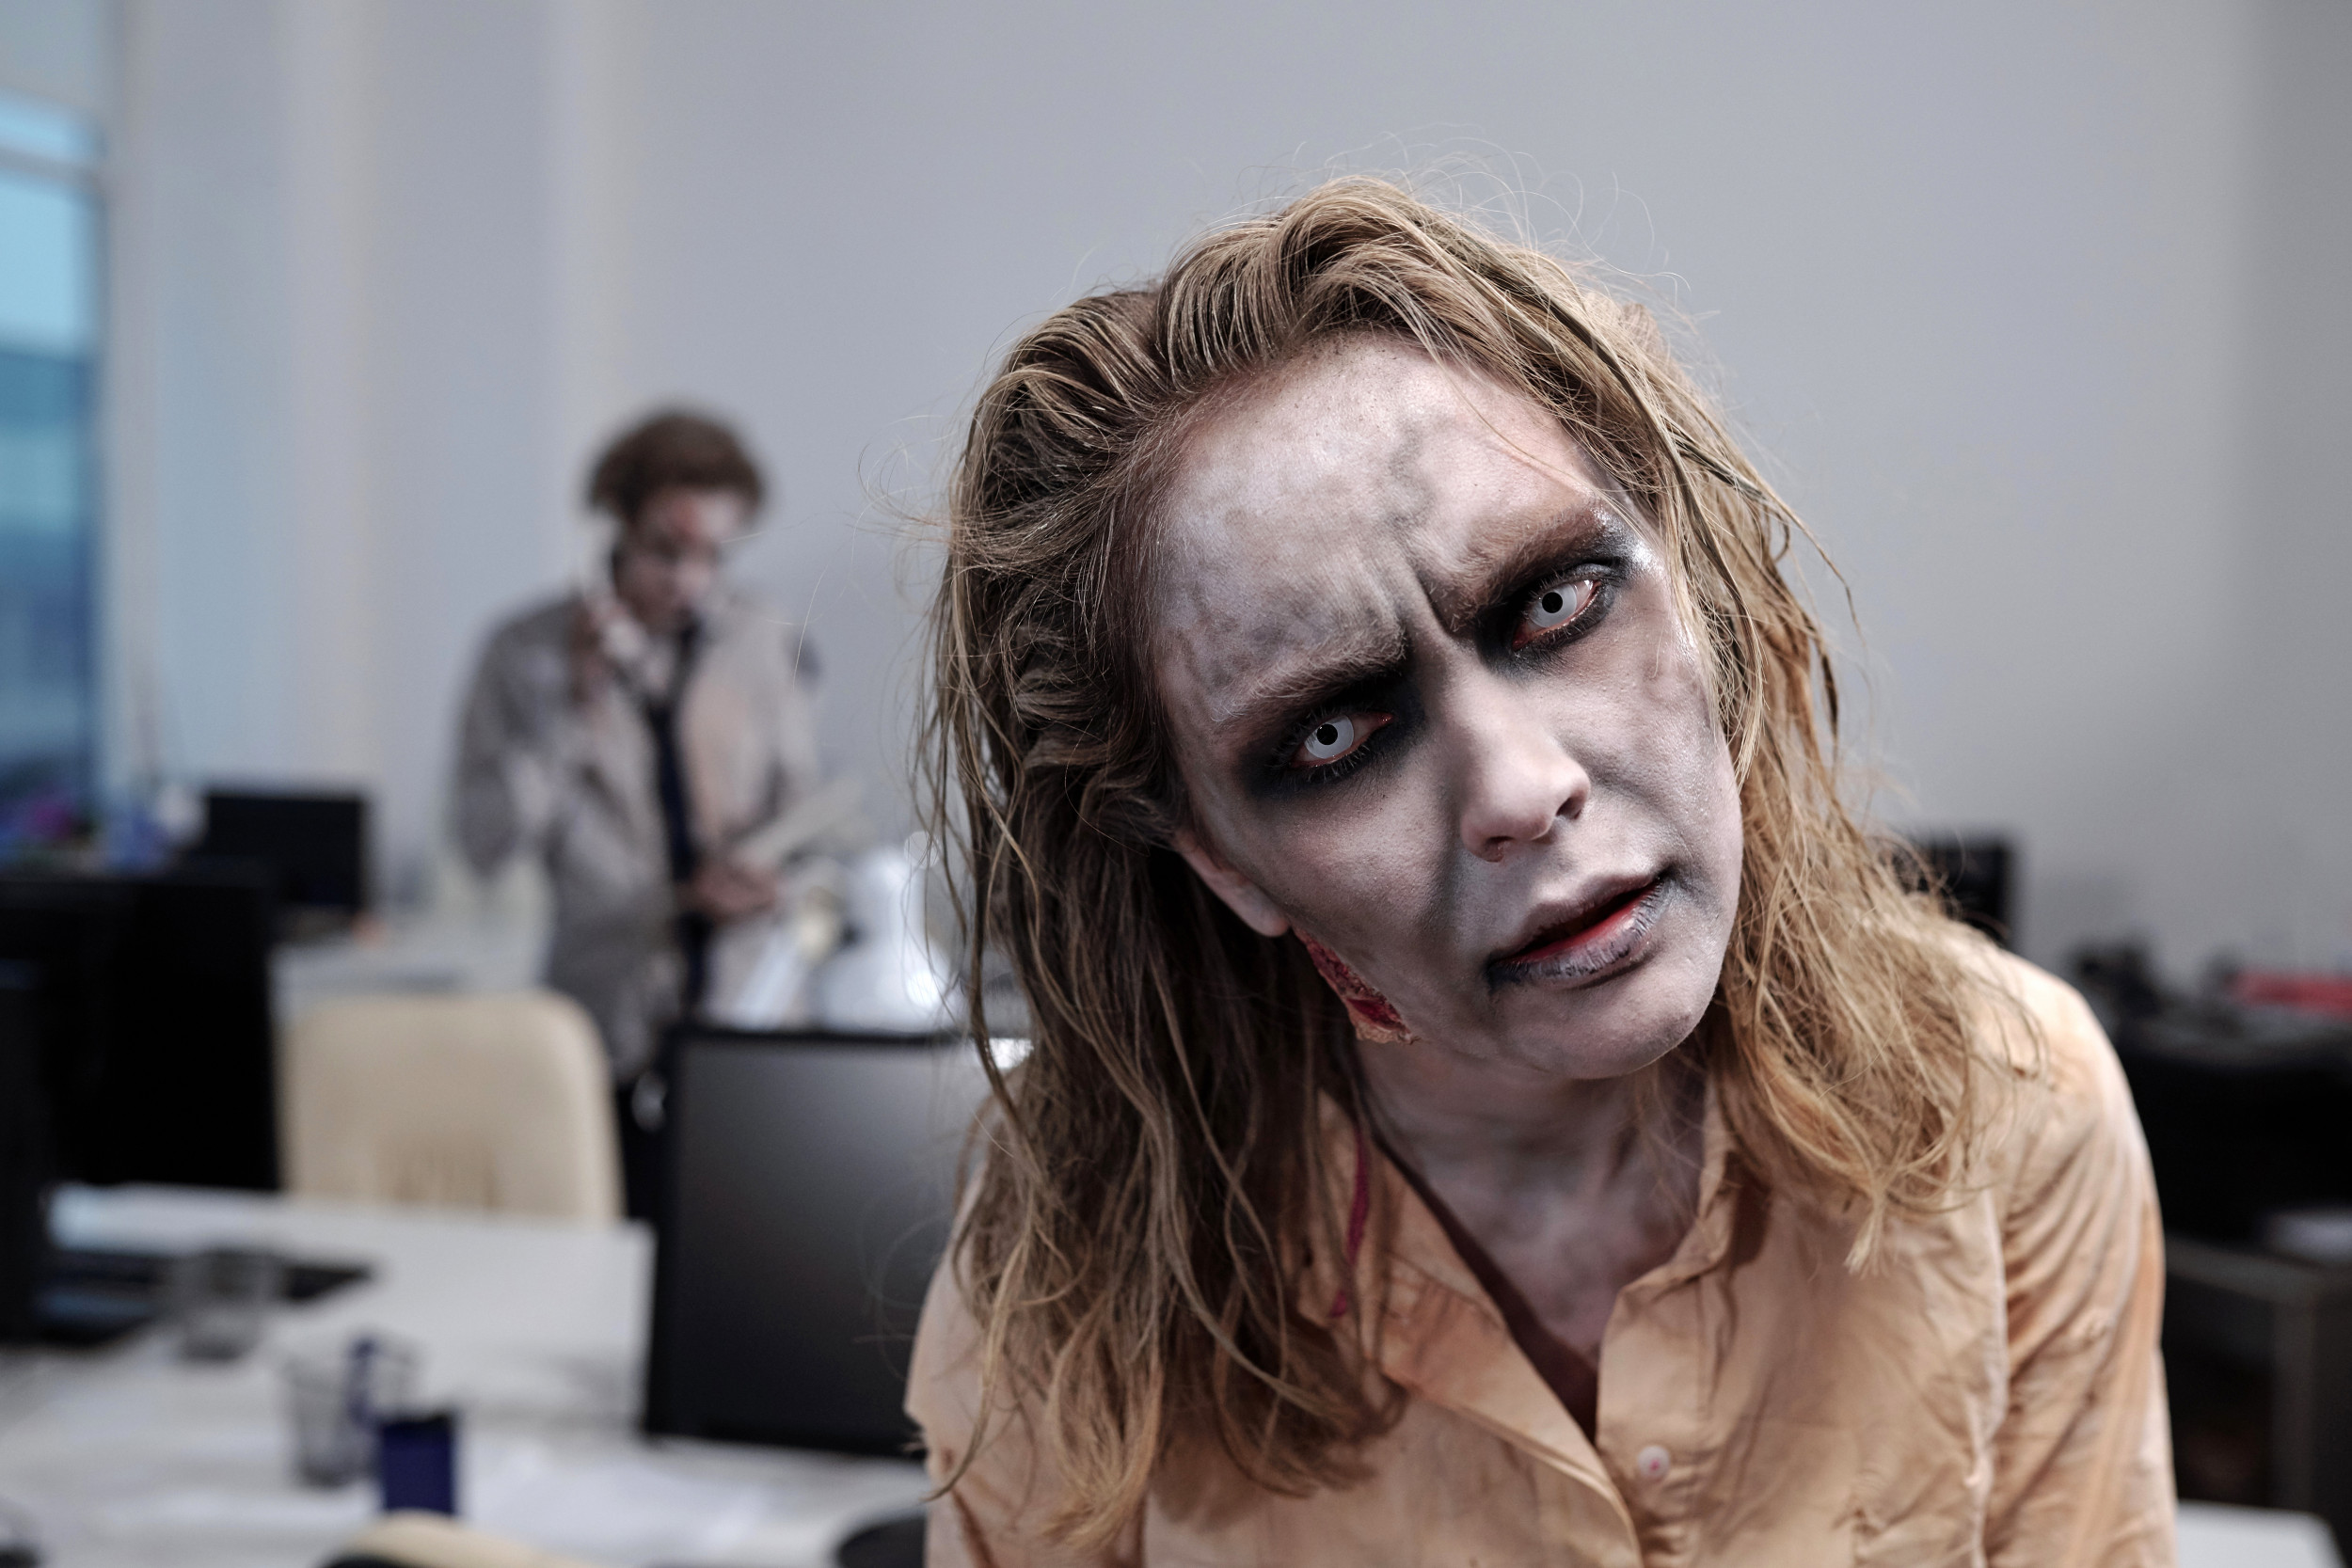 Will Zombies Come in the Future? Can Scientists Actually Create Them?